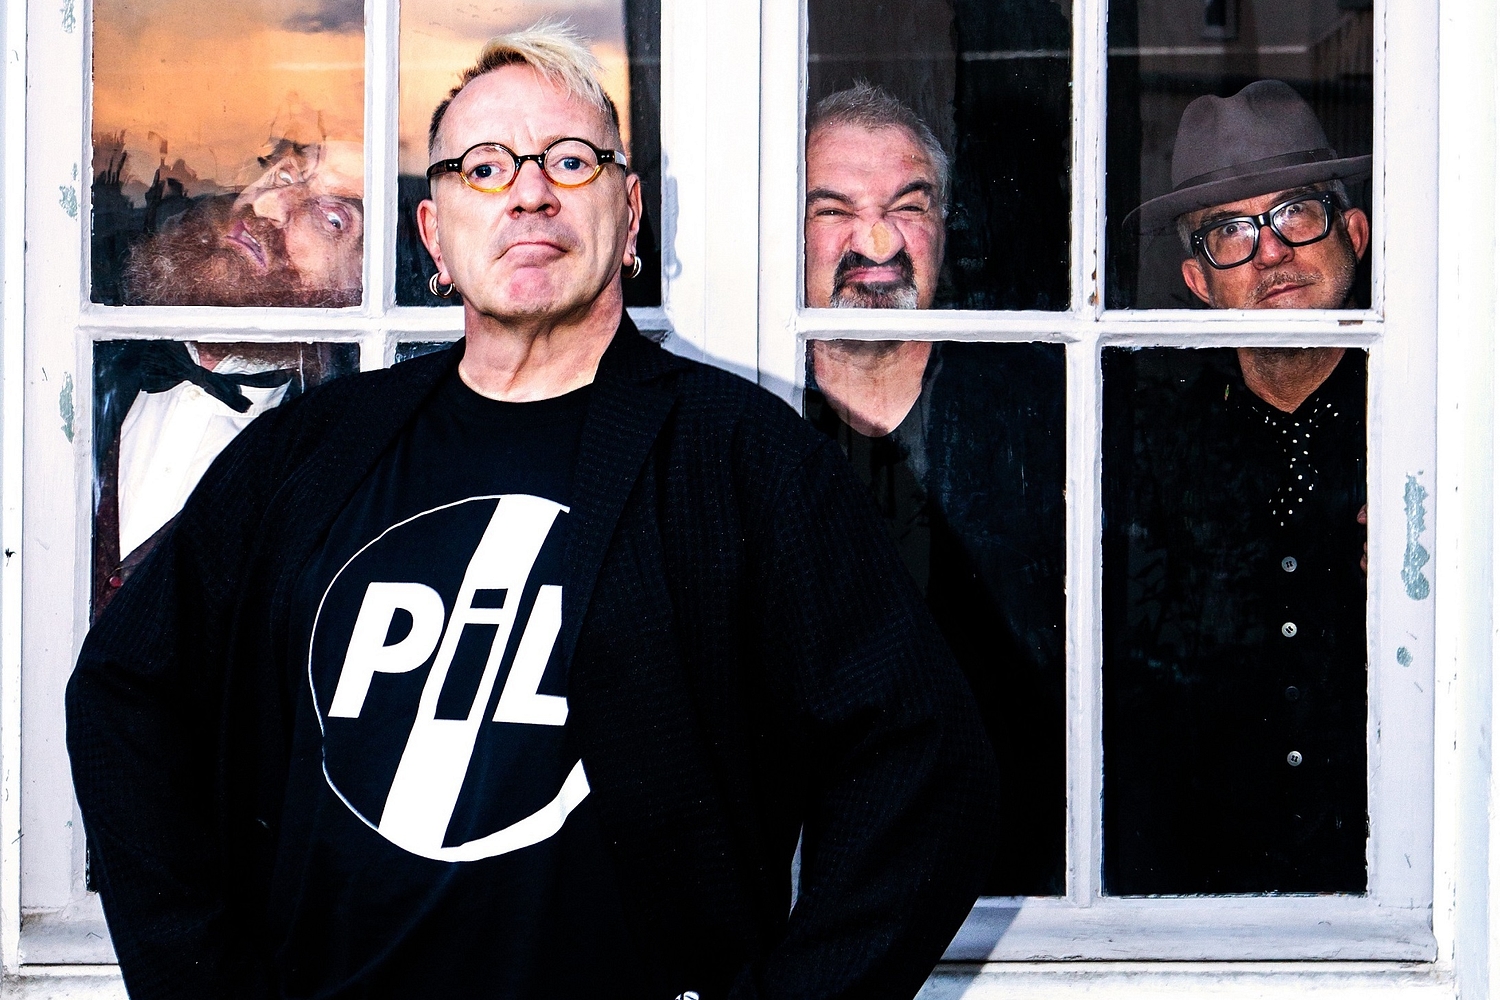 Public Image Ltd. are competing to represent Ireland at the Eurovision Song Contest